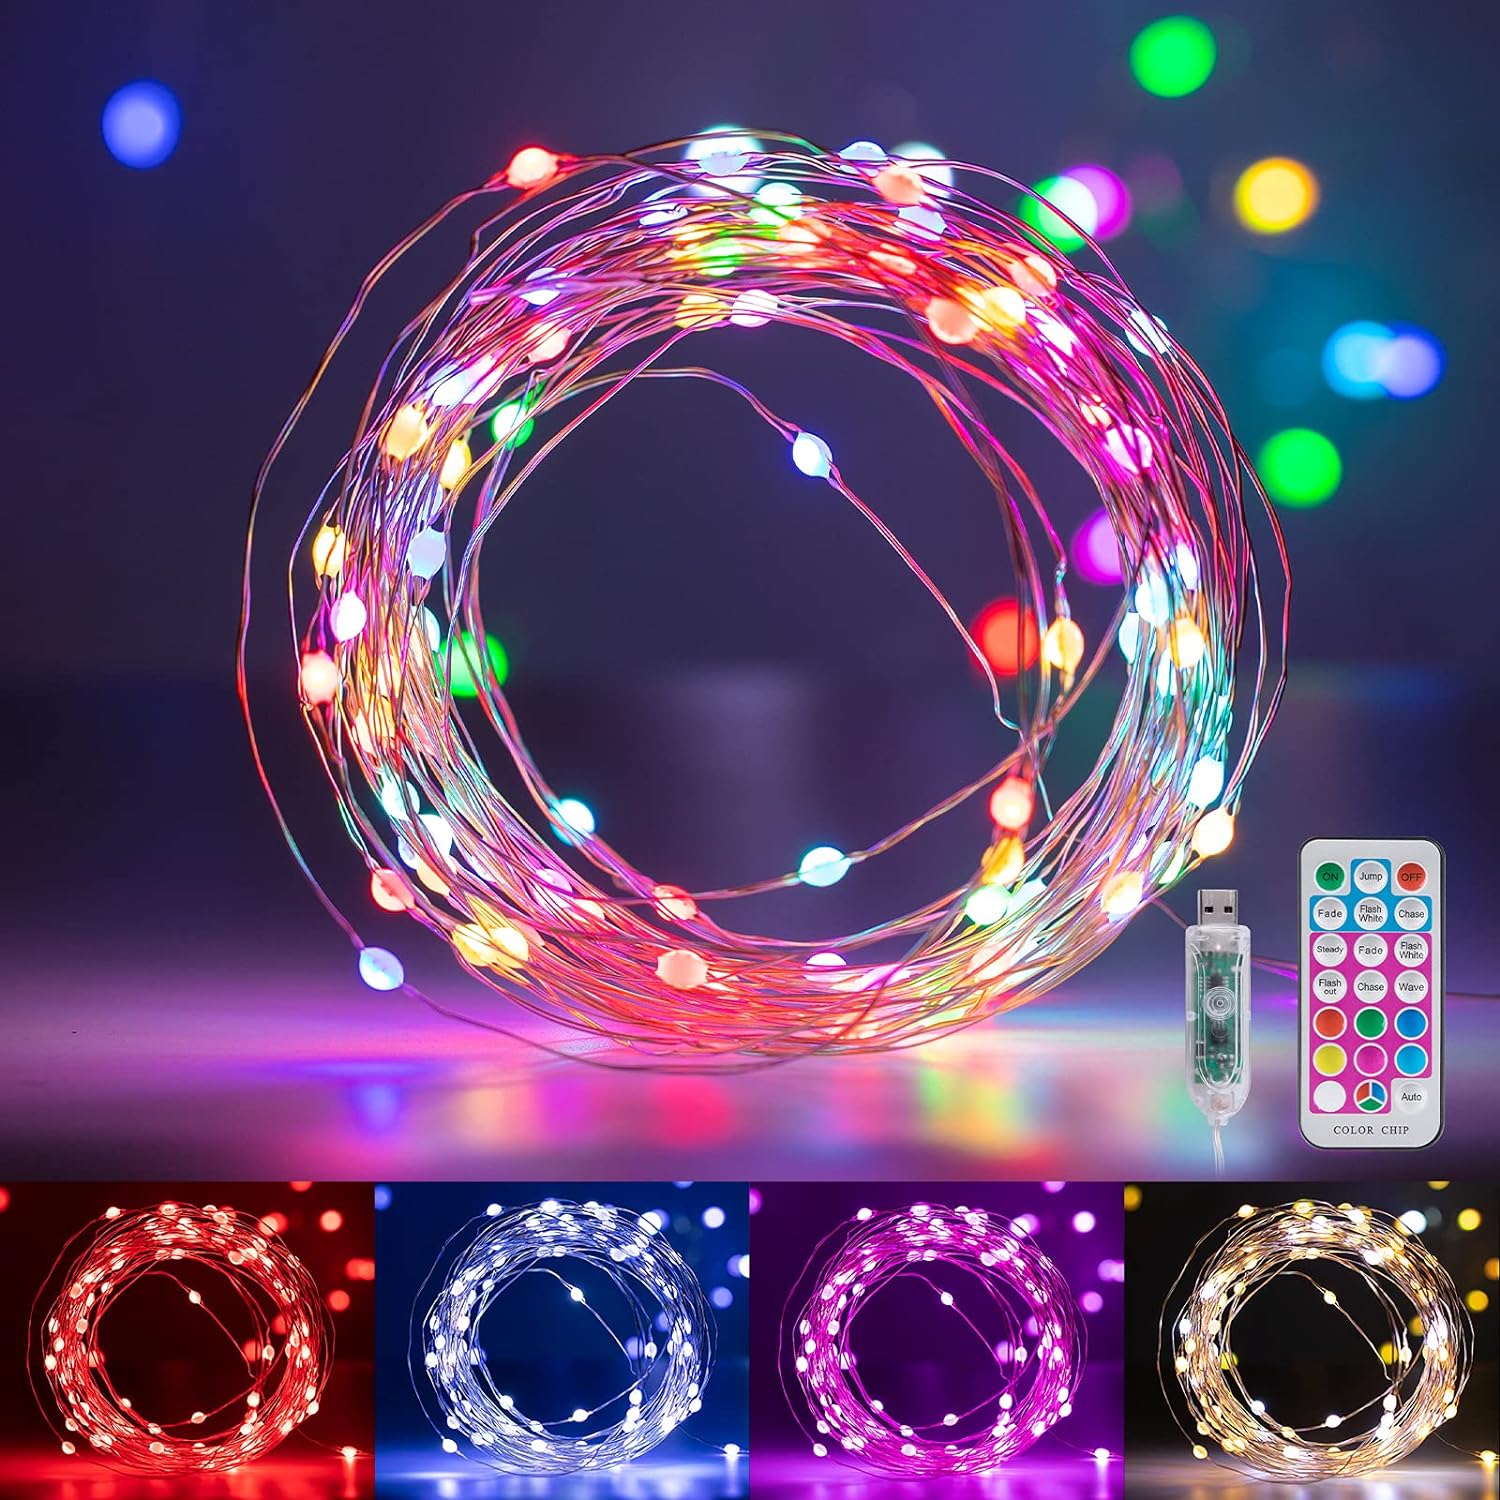 Minetom Fairy Lights Color Changing - 33 FT 100 LED String Lights with Remote, 11 Modes USB Powered Valentines Lights Indoor, Waterproof Twinkle Lights for Bedroom Classroom Easter St. Patrick Party